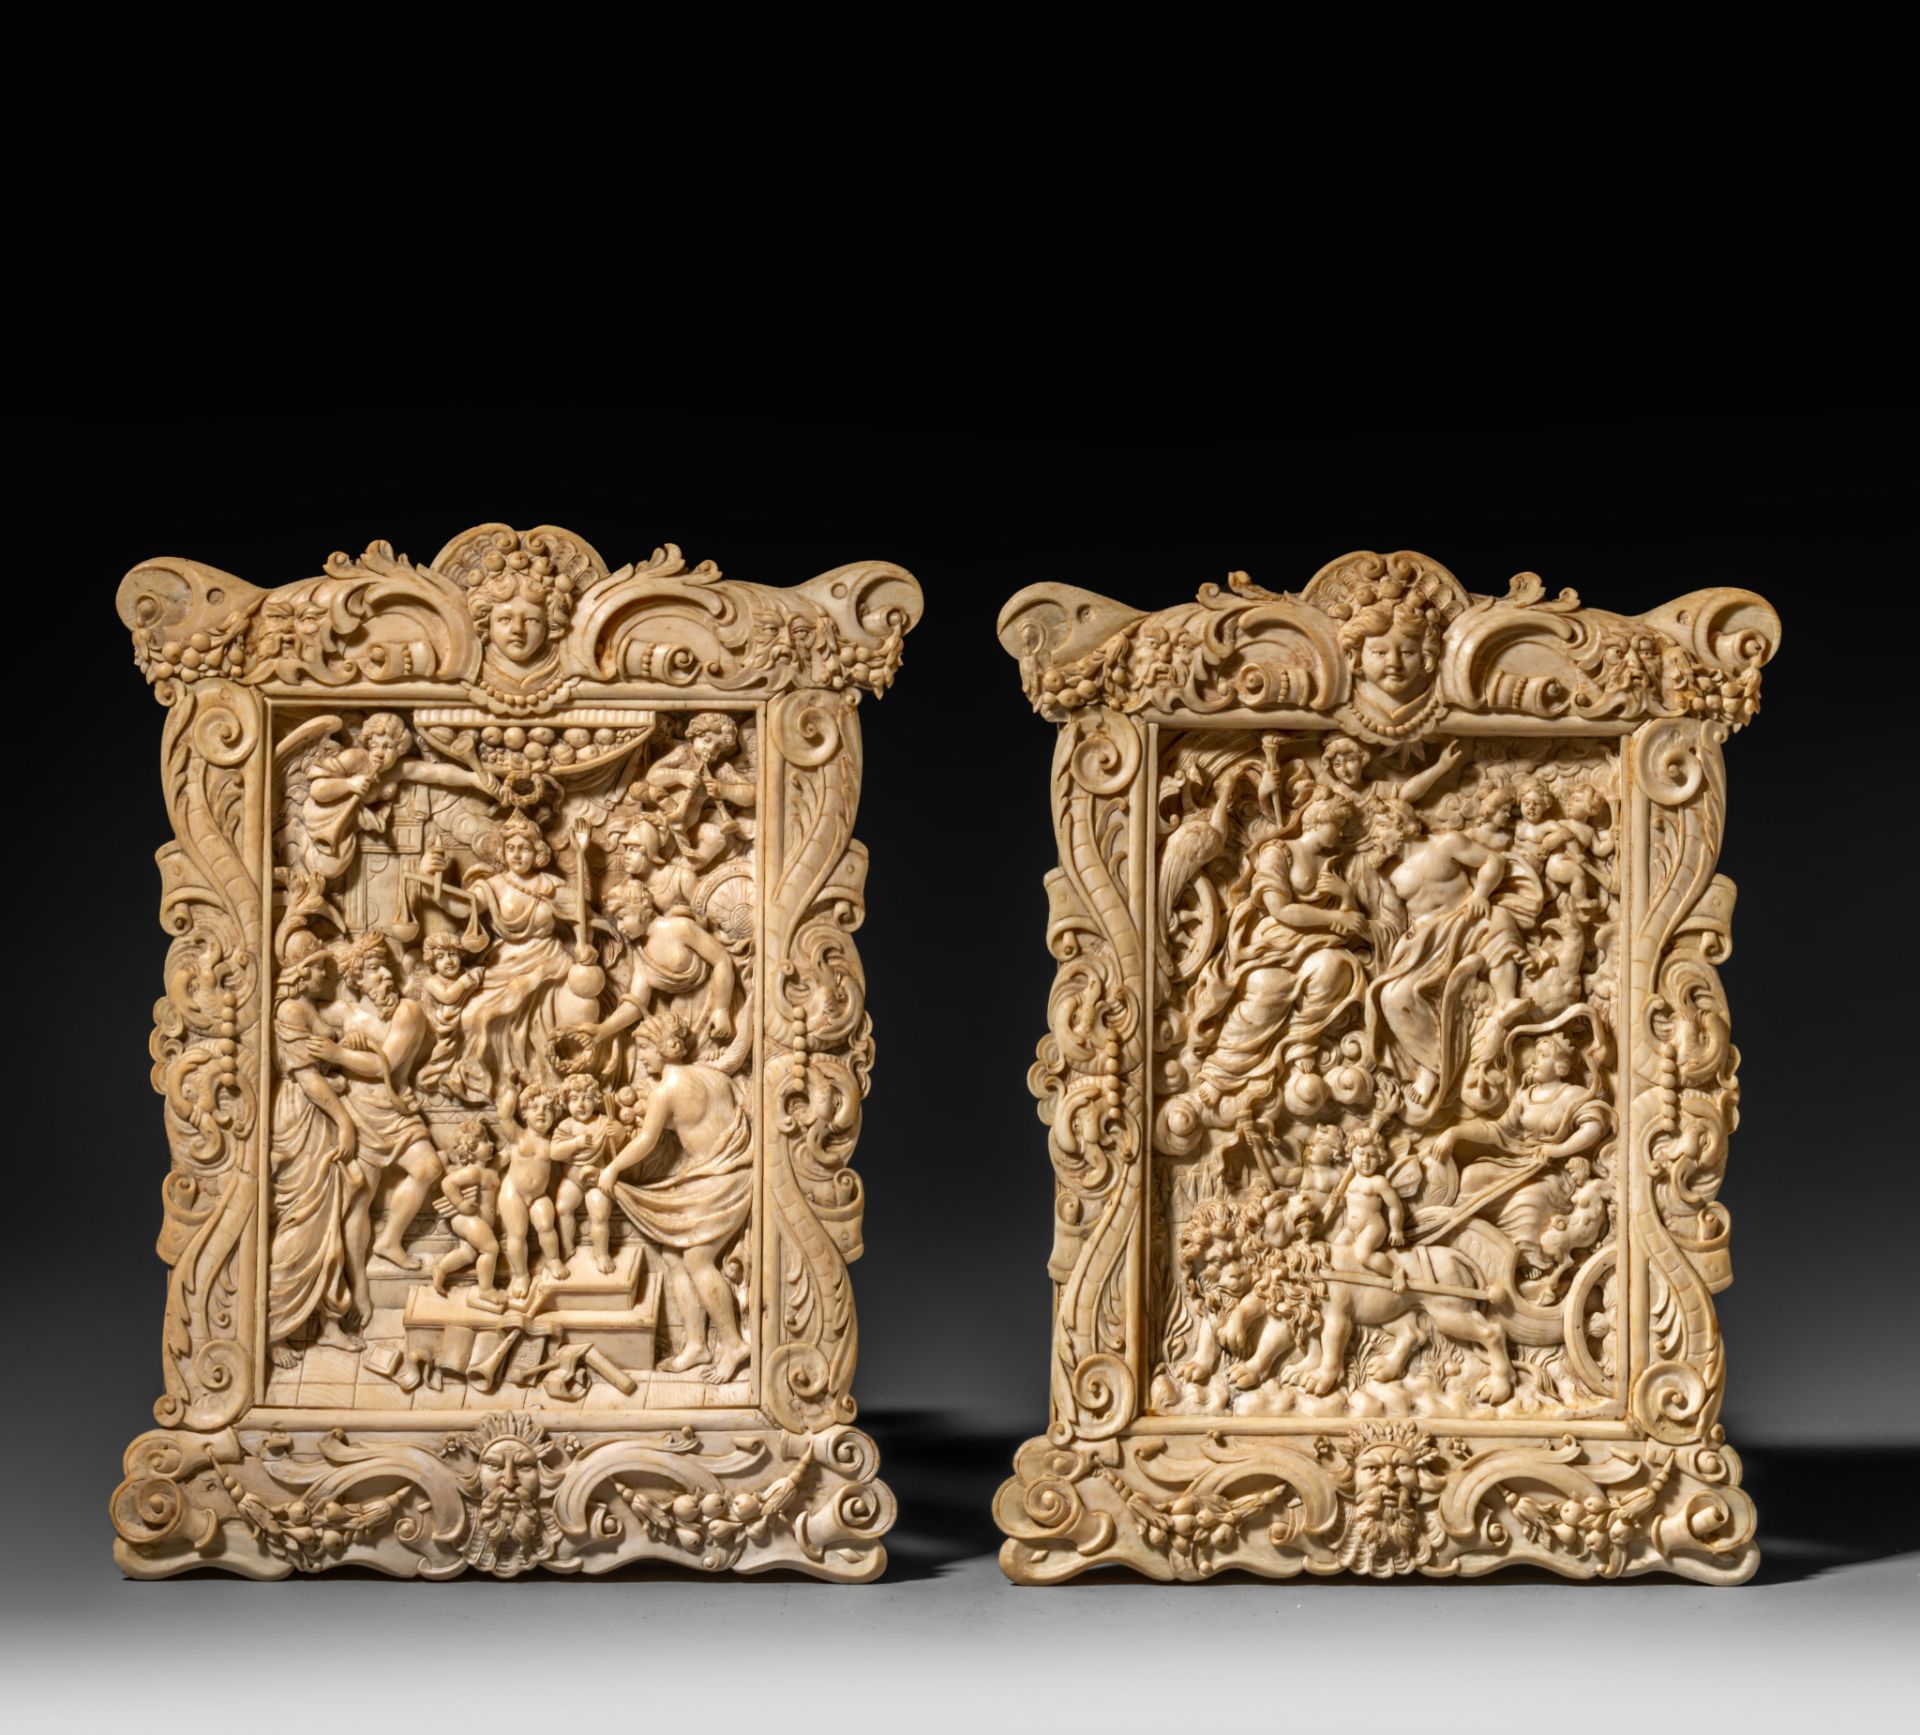 A pair of plaques carved in high relief, second half 19thC, 18 × 24,4 cm, 429 g - 490 g (+)